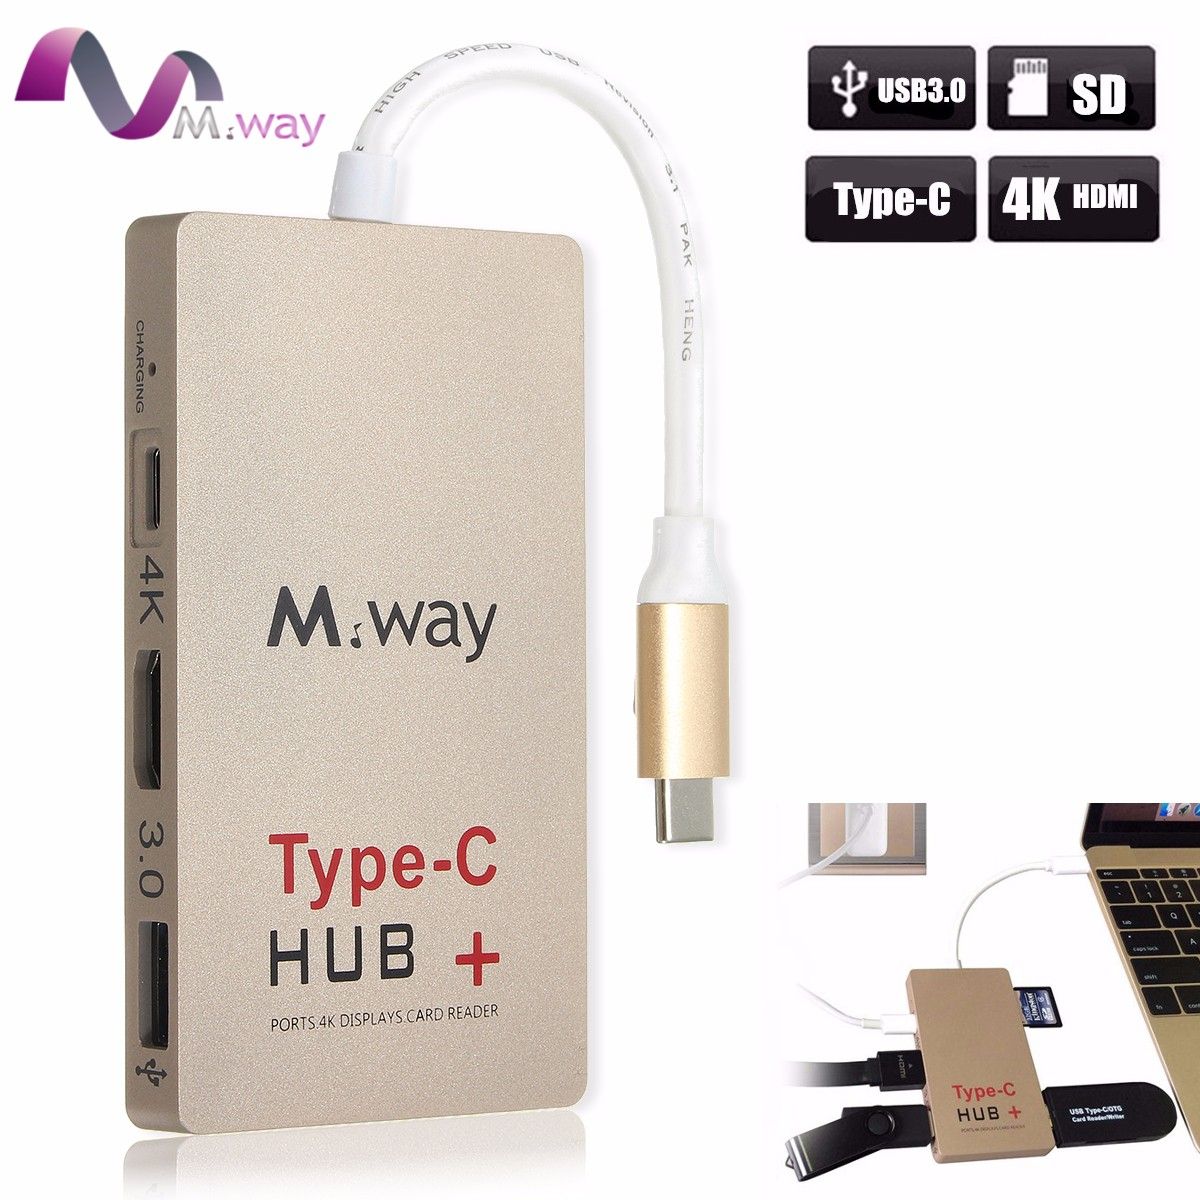 MWay-USB-31-Type-C-to-4k-HDMI-USB-30-HUB-USB-C-Charger-SD-Card-Reader-Adapter-1092890